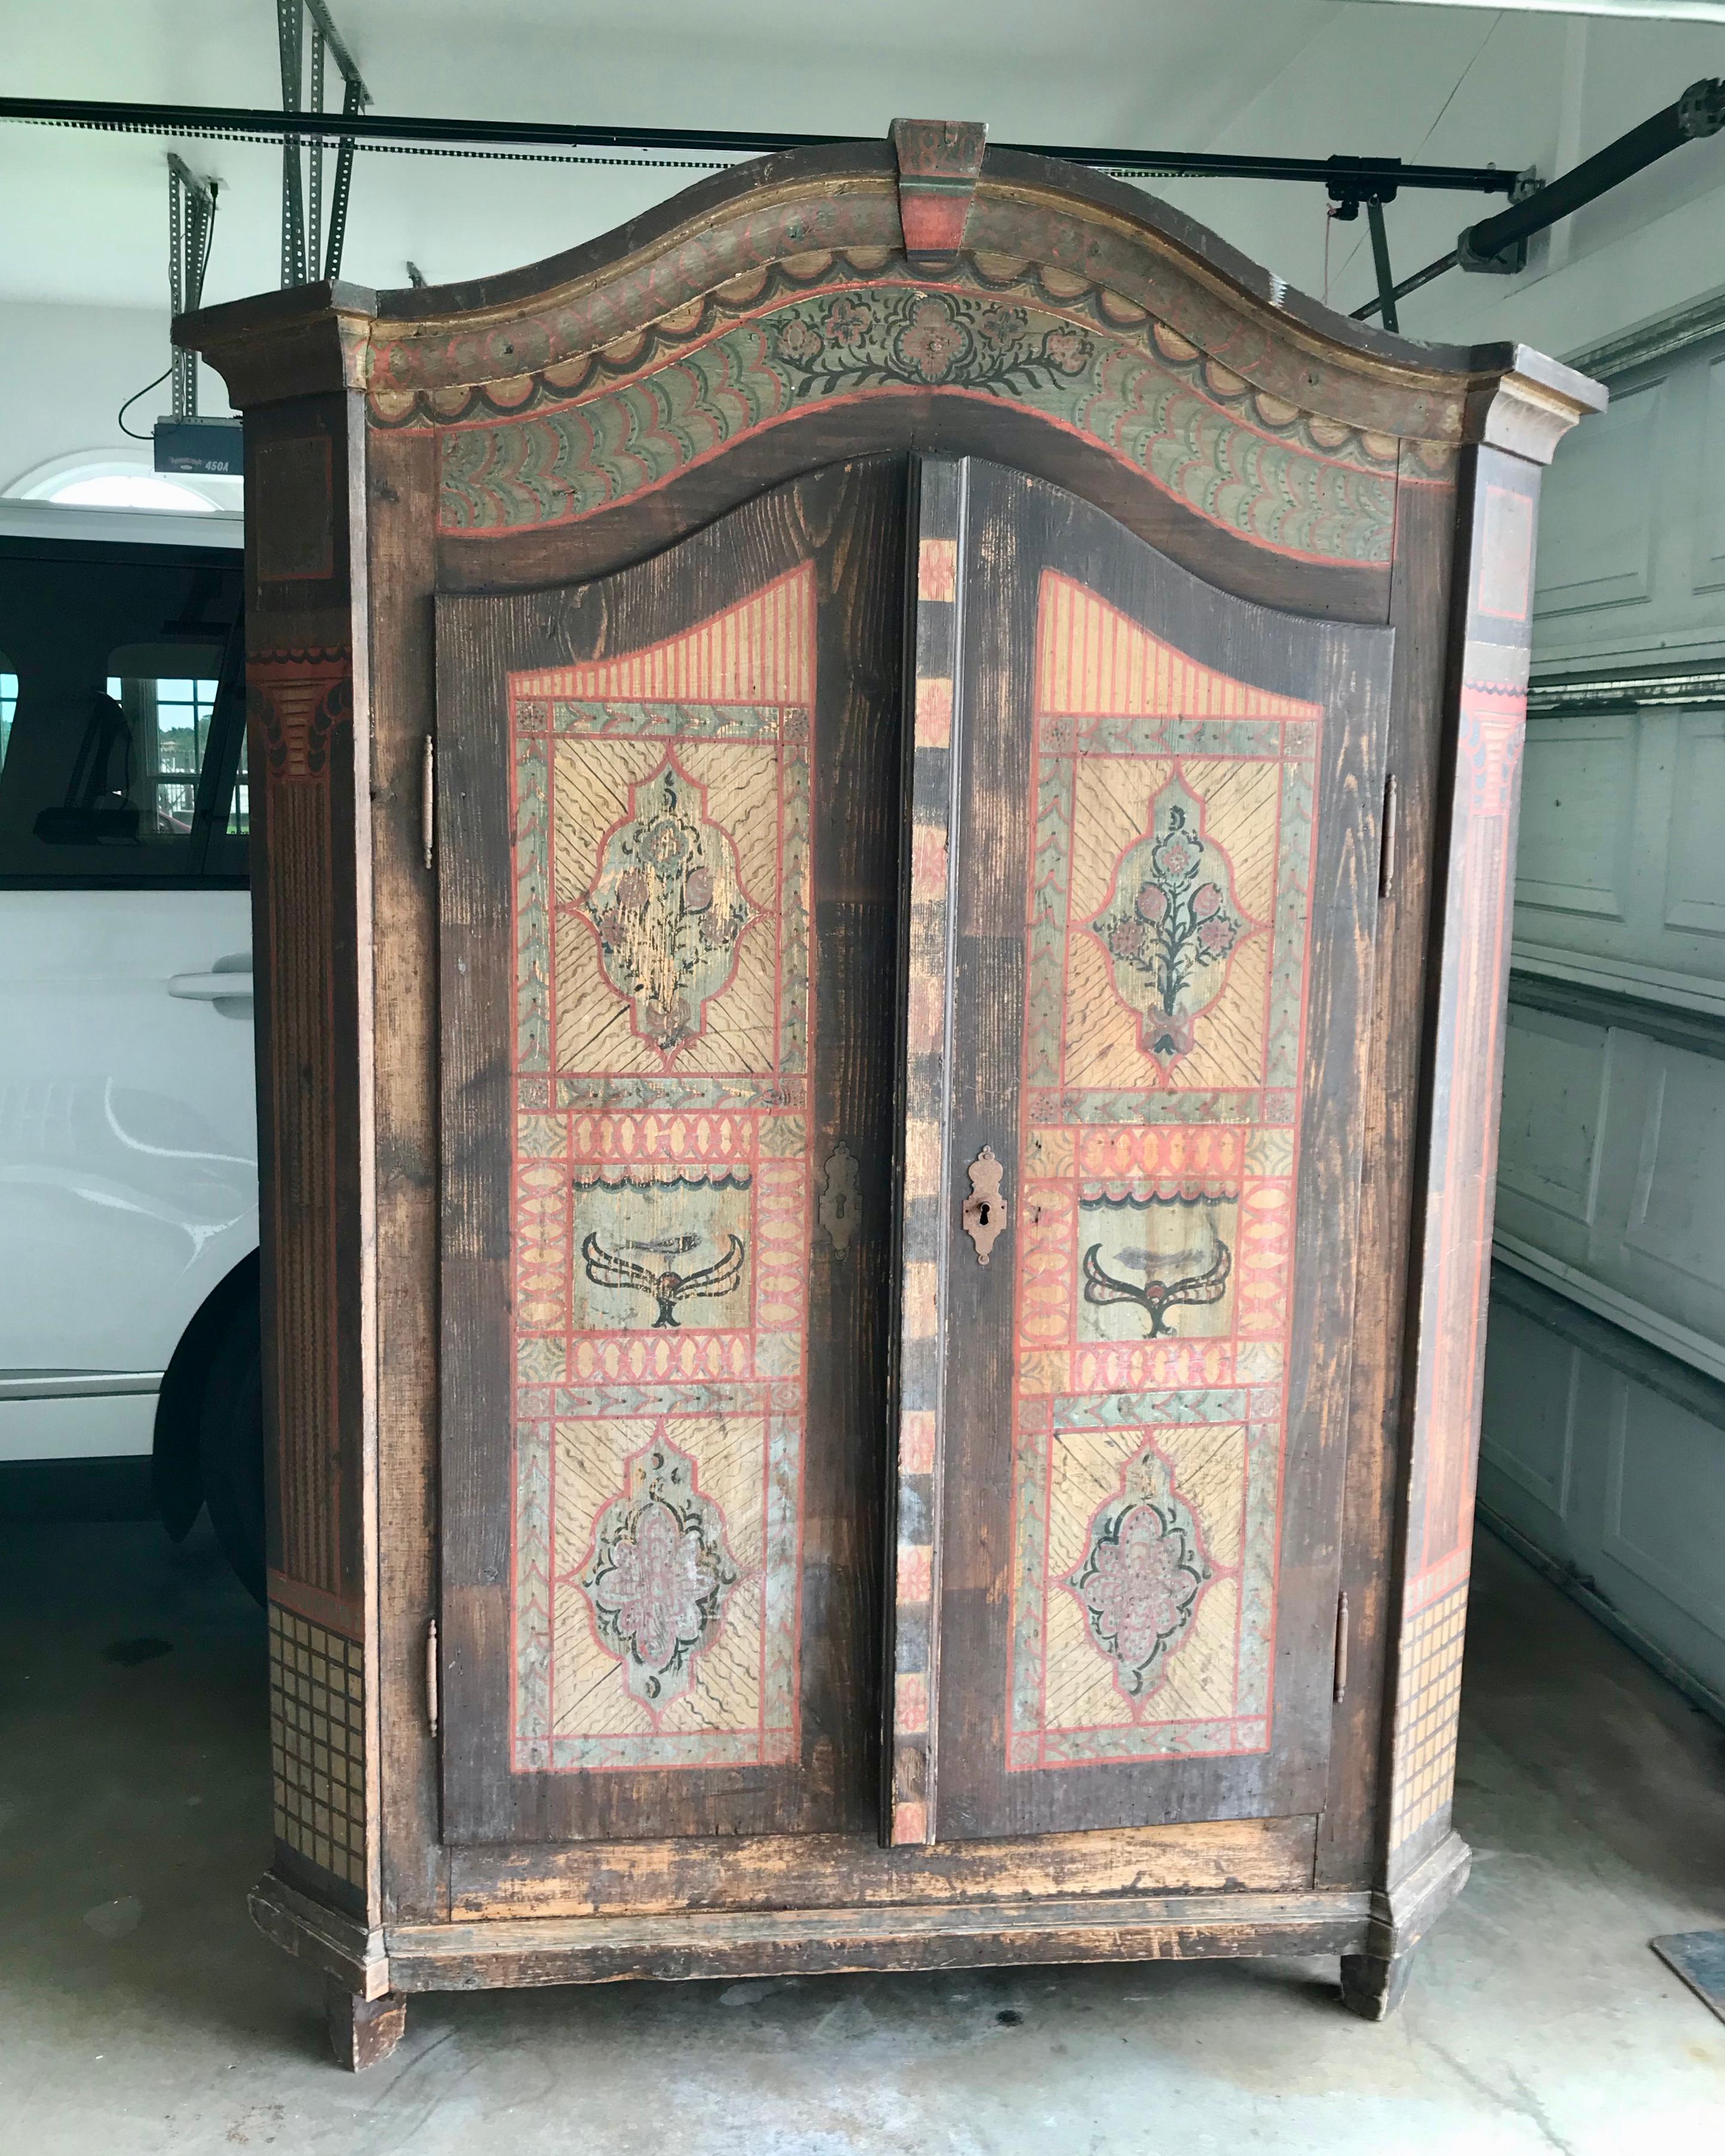 The cabinet is hand painted with double doors. Northern Italian (Alpine) origin.
The cabinet is fitted with shelves. The cabinet is dated 1820 on its crown.